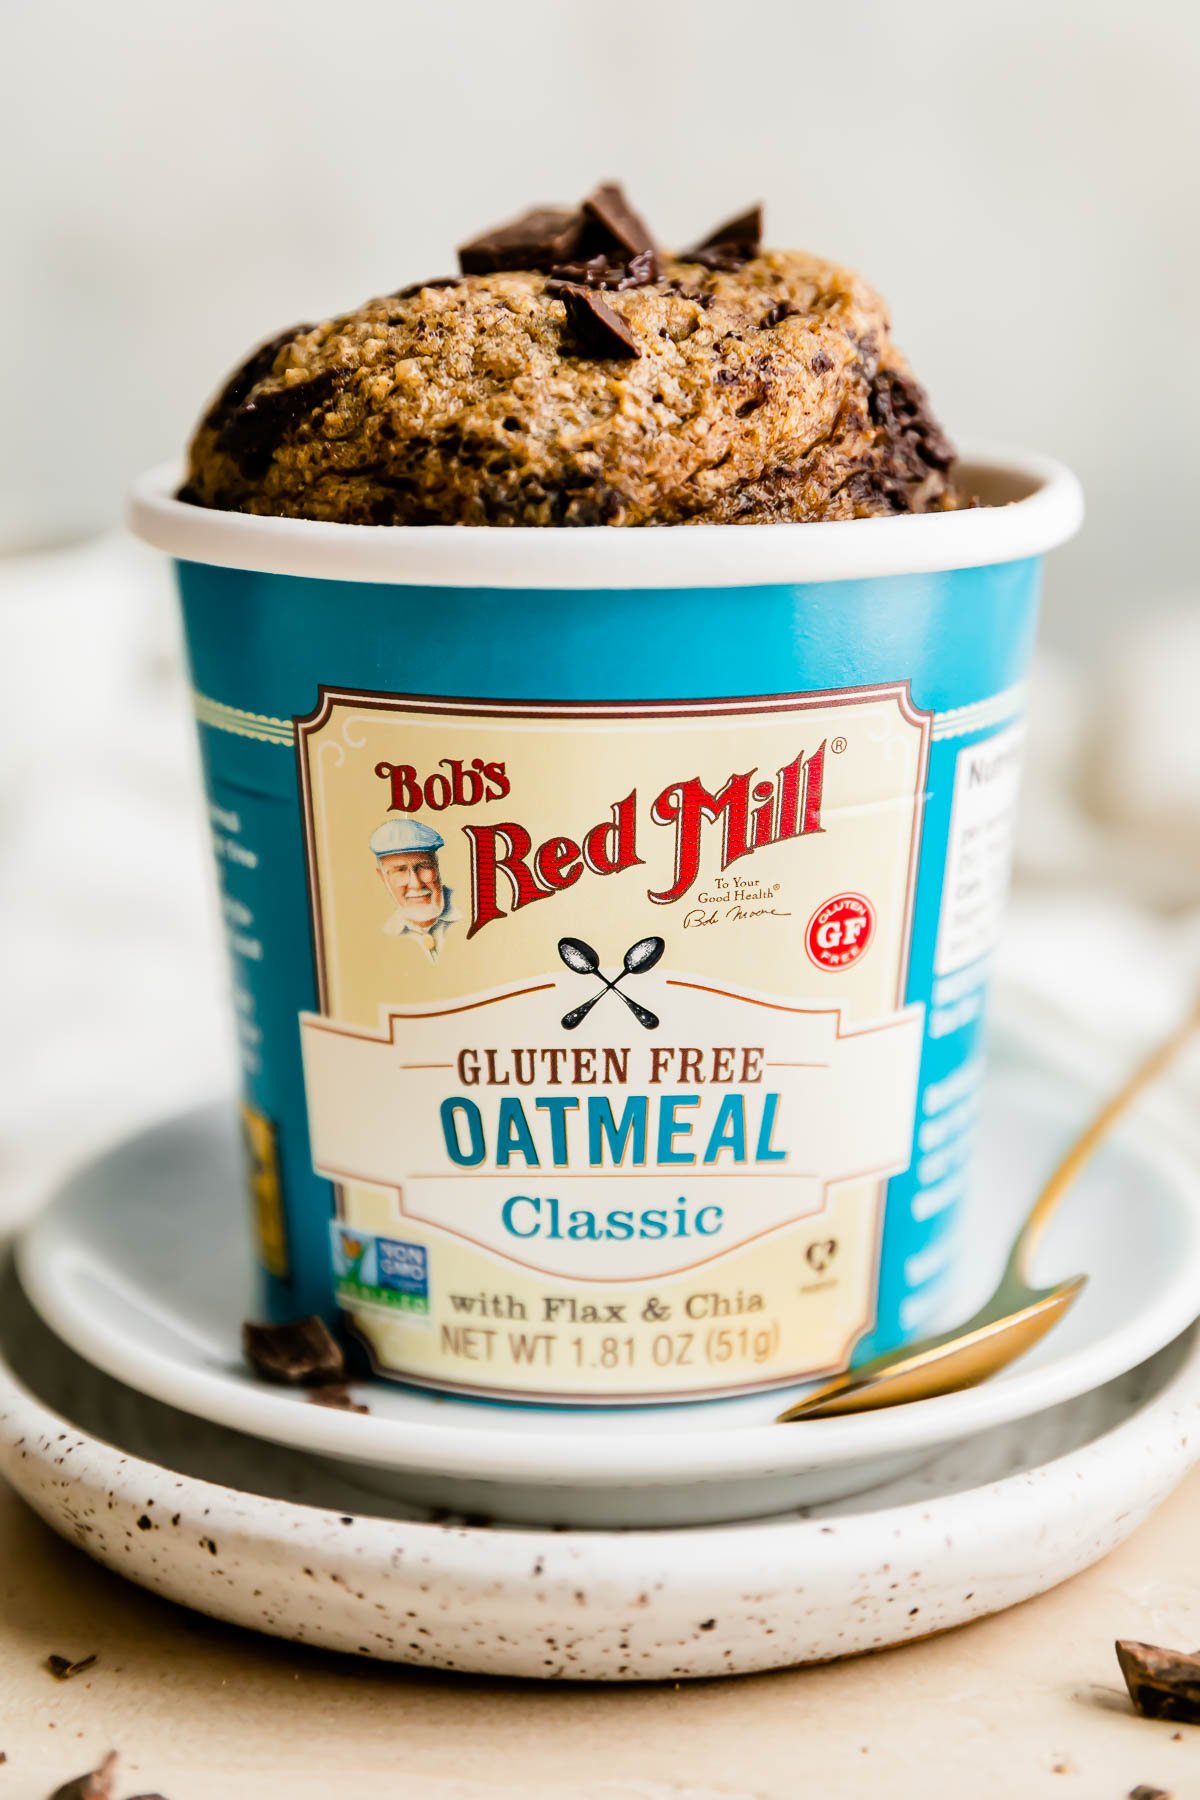 A banana oatmeal mug cake fills a Bob's Red Mill Gluten Free Classic Oatmeal Cup with Flax & Chia. The oatmeal cup sits atop two plates atop a creamy white textured surface with the label facing outwards and is surrounded by a white linen napkin. A gold spoon rests atop the plates.